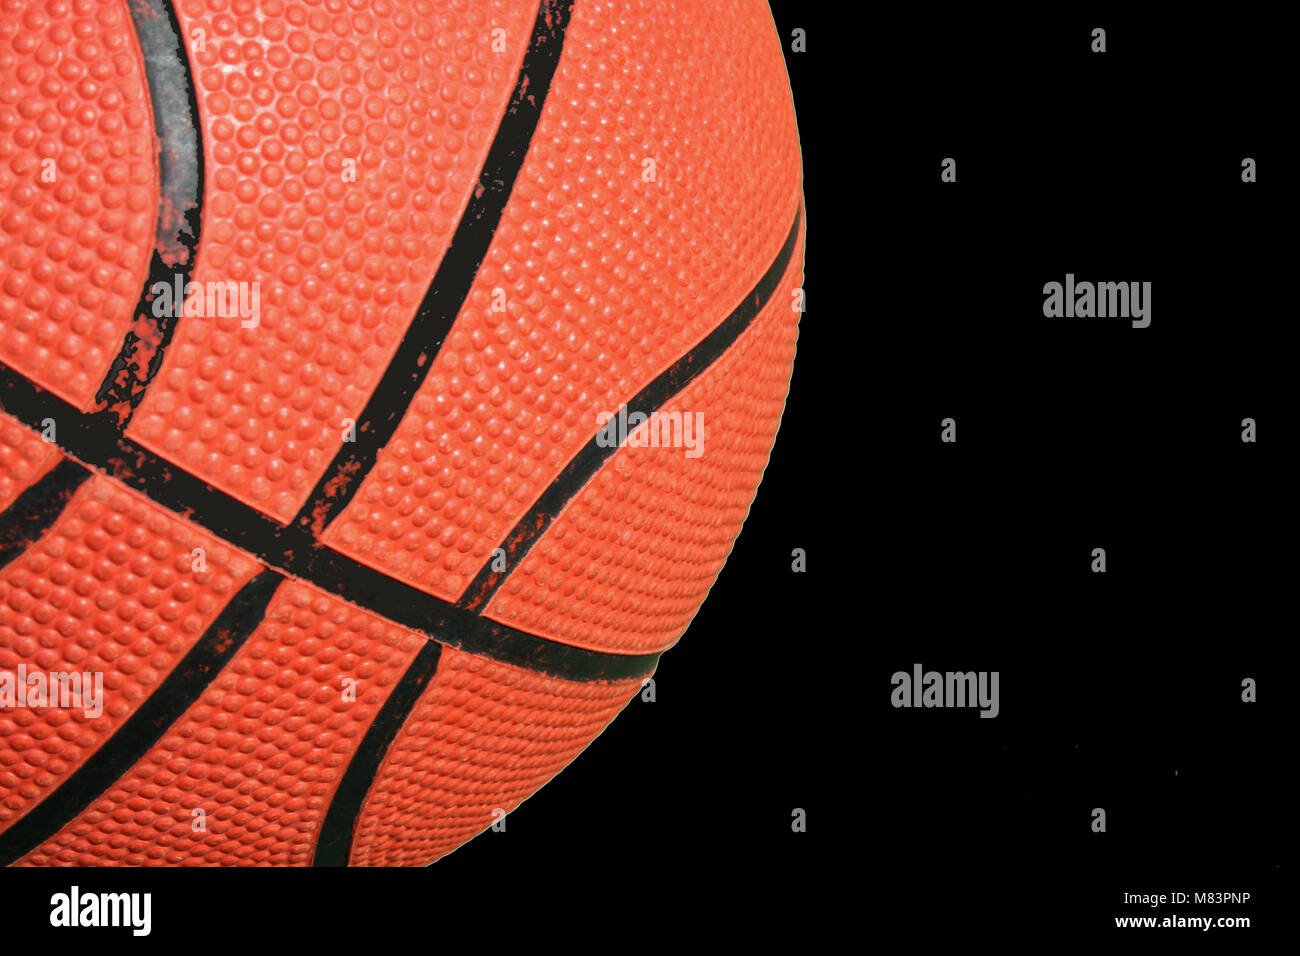 A Basketball close up on green court Stock Photo